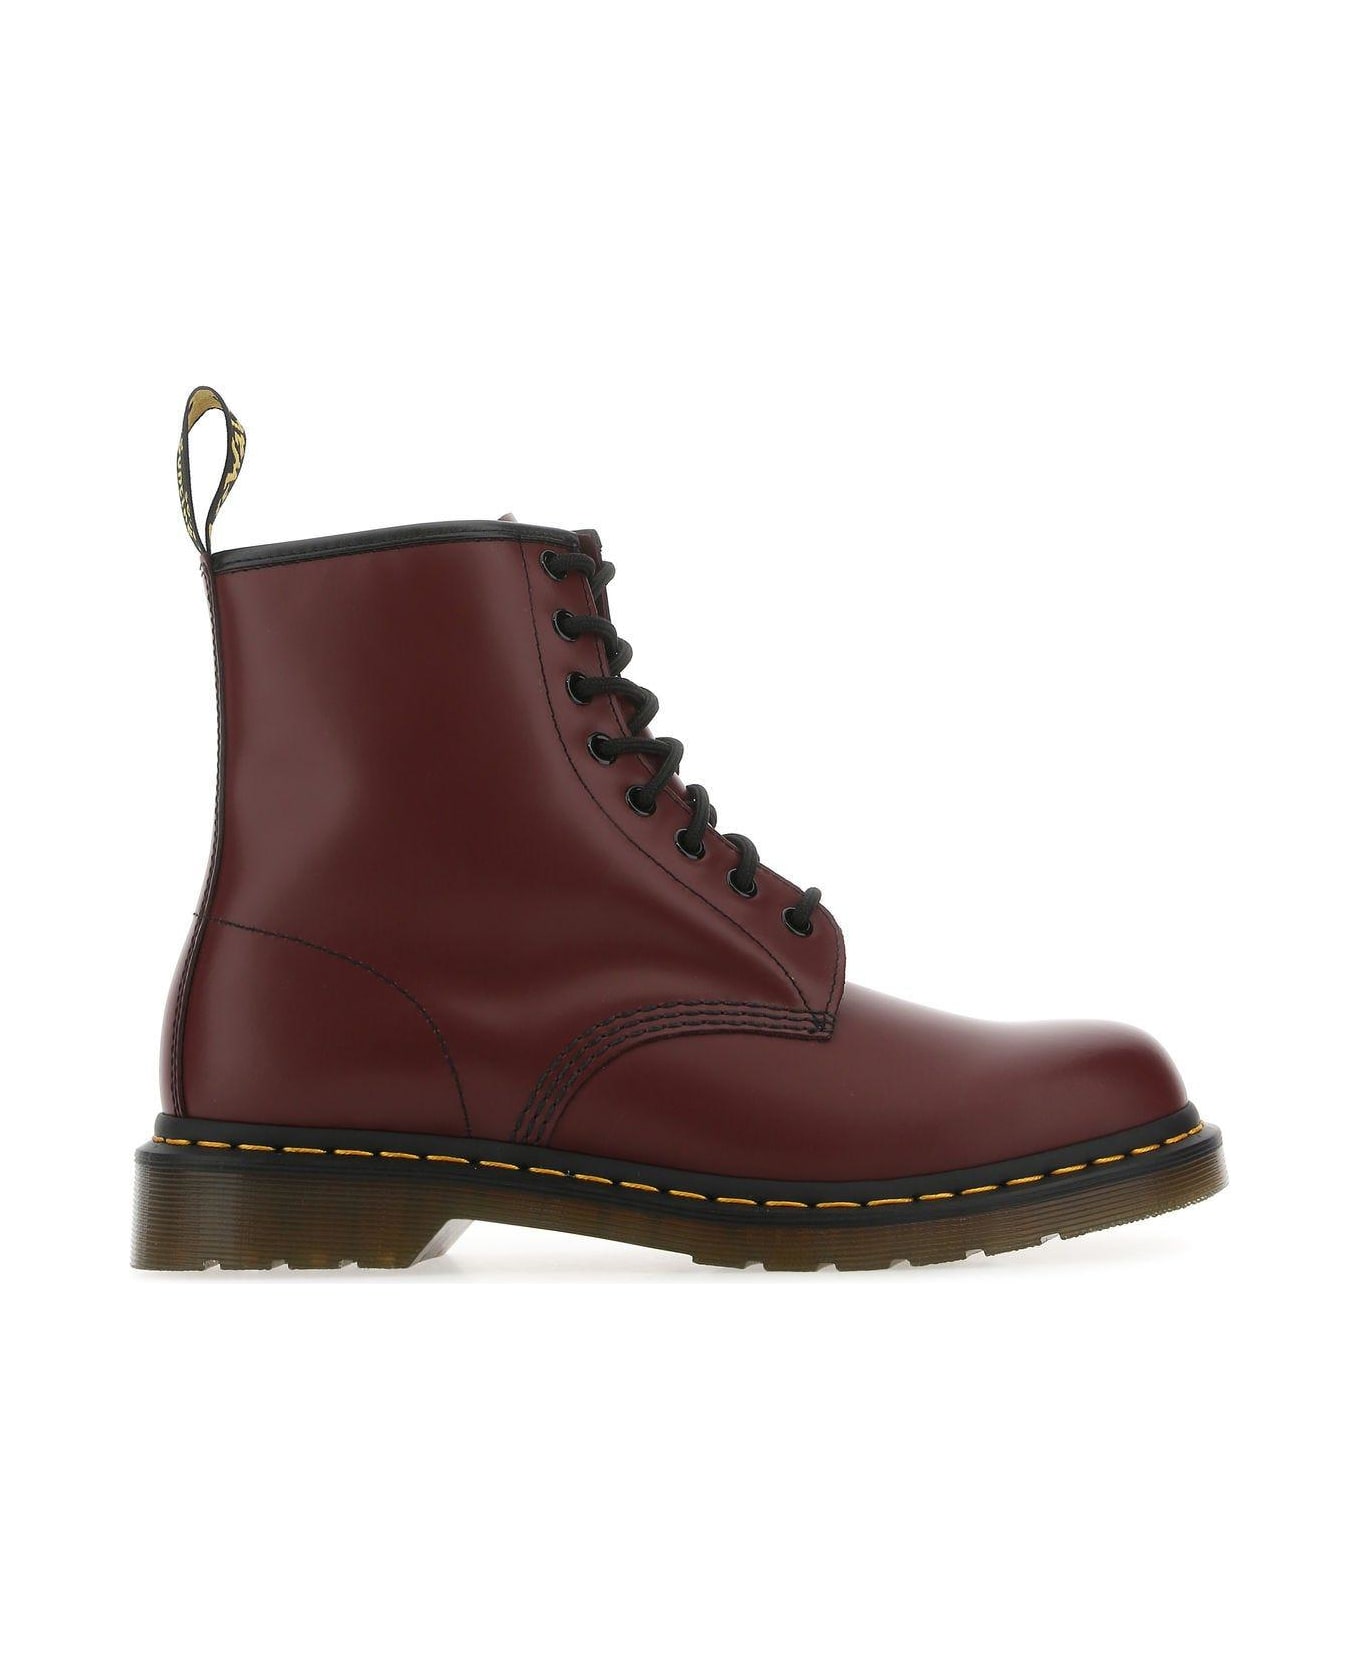 Dr. Martens Burgundy Leather 1460 Ankle Boots